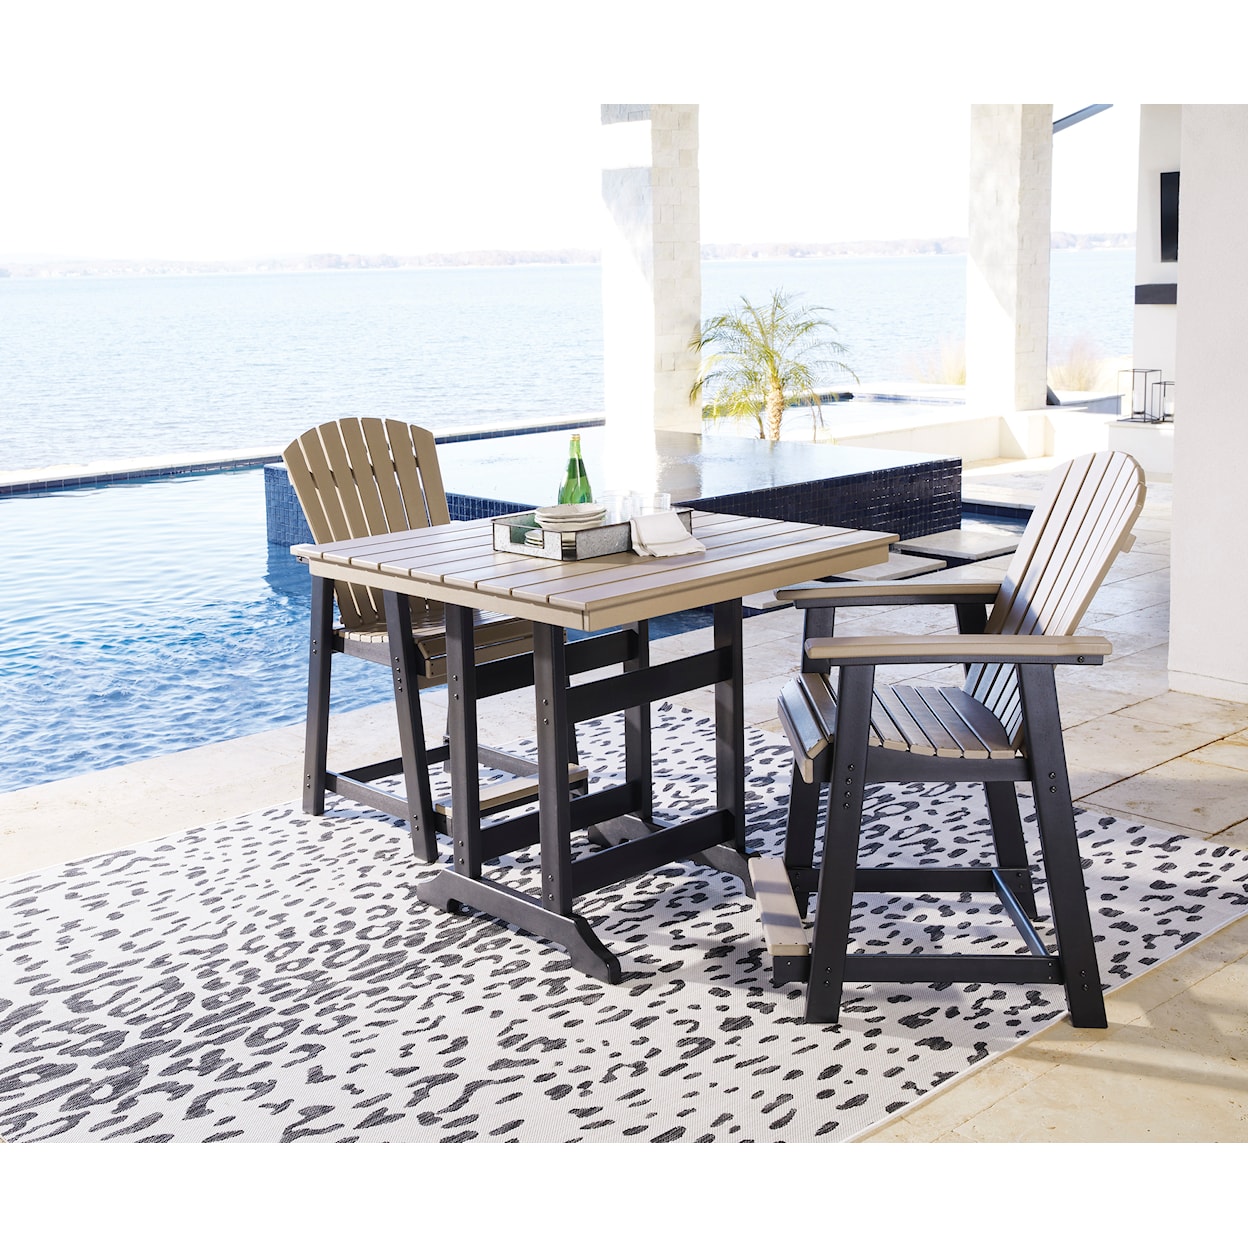 Benchcraft Fairen Trail Outdoor Counter Height Dining Table